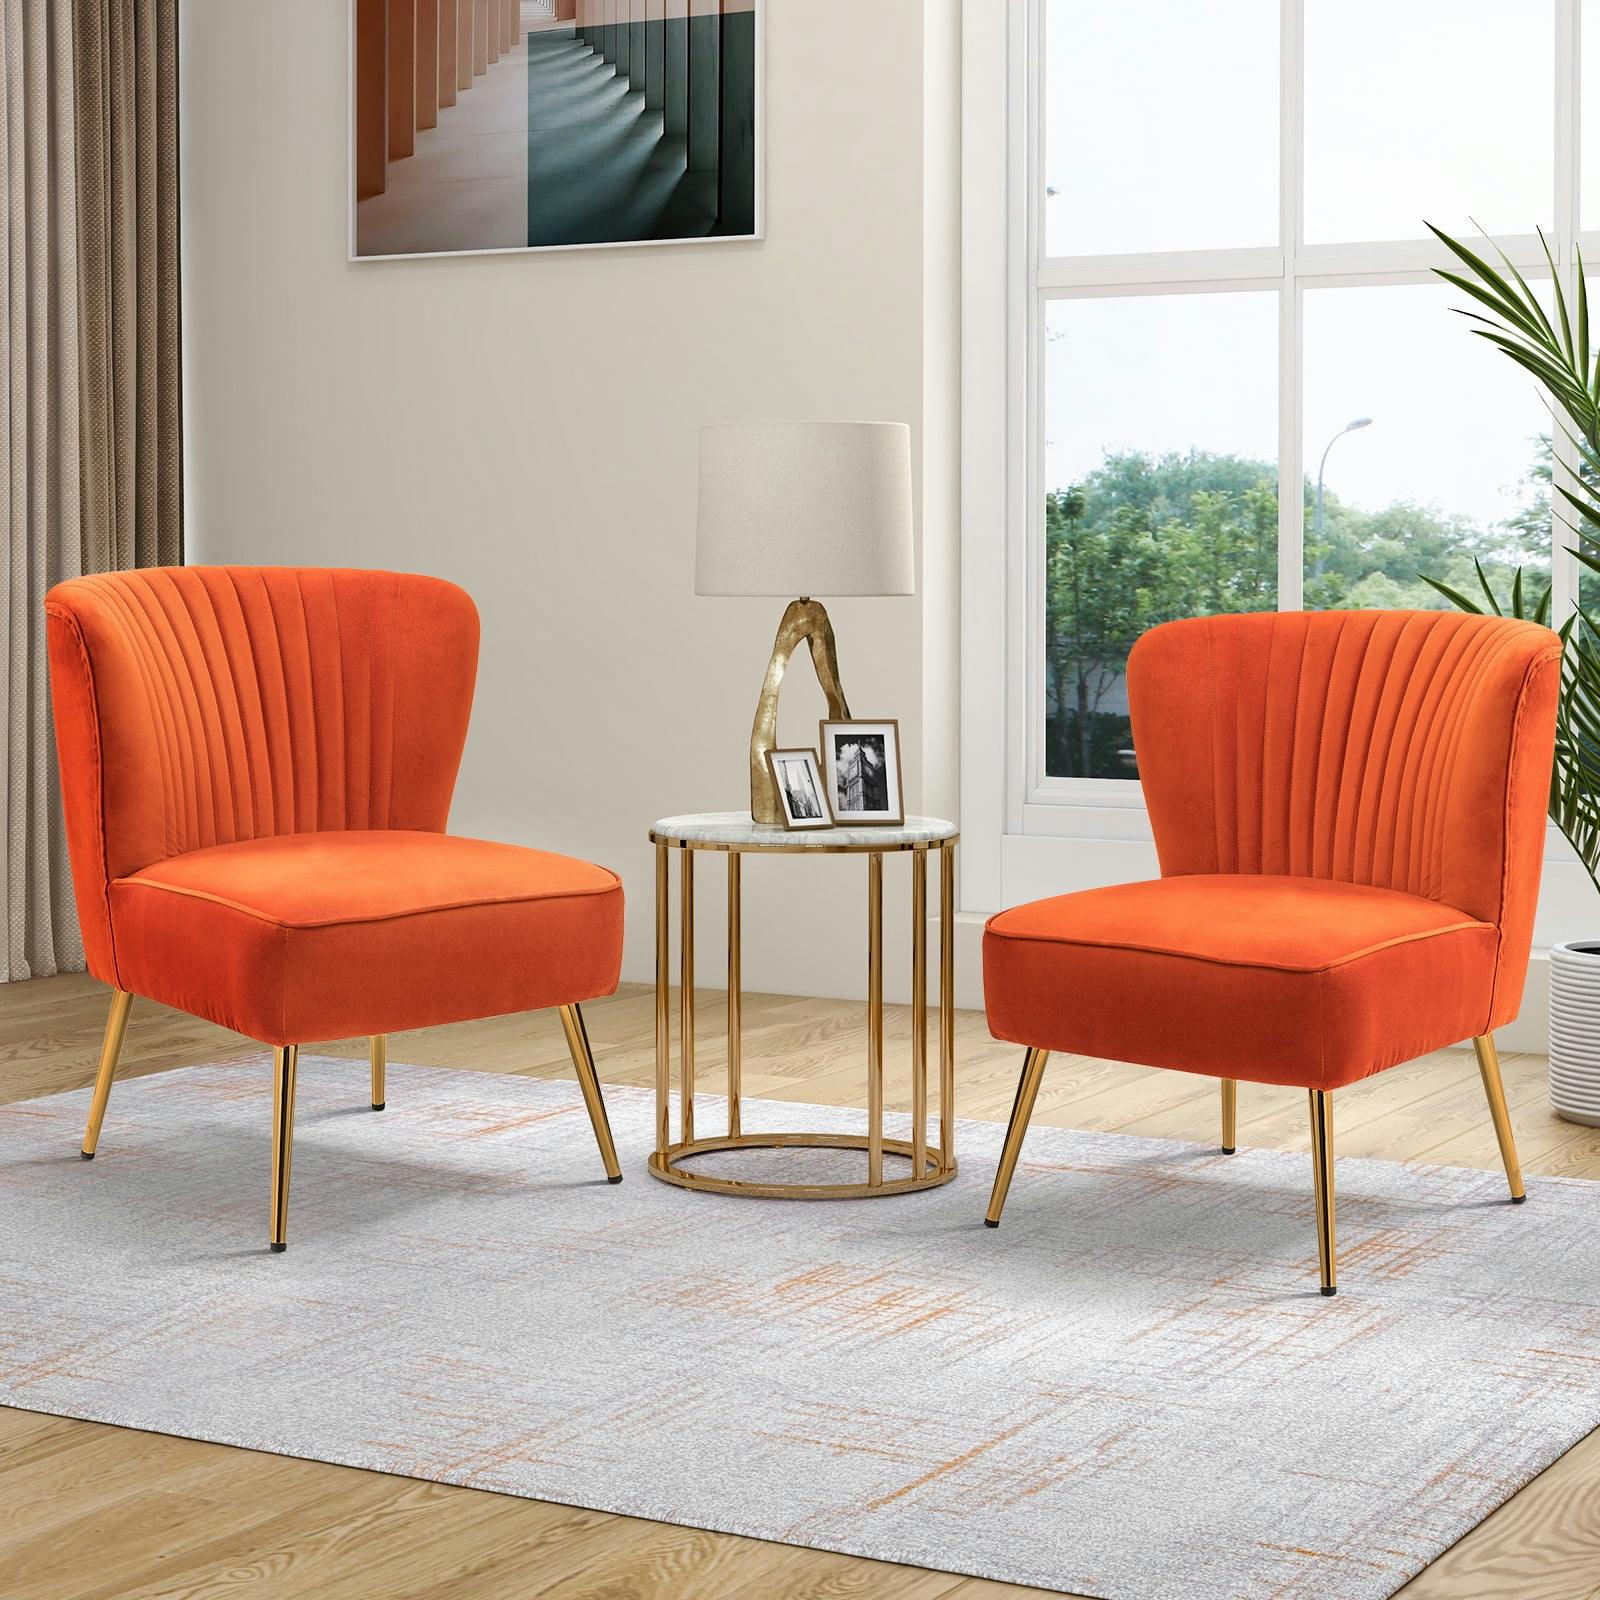 Plush Orange Velvet Accent Chair with Manufactured Wood Frame